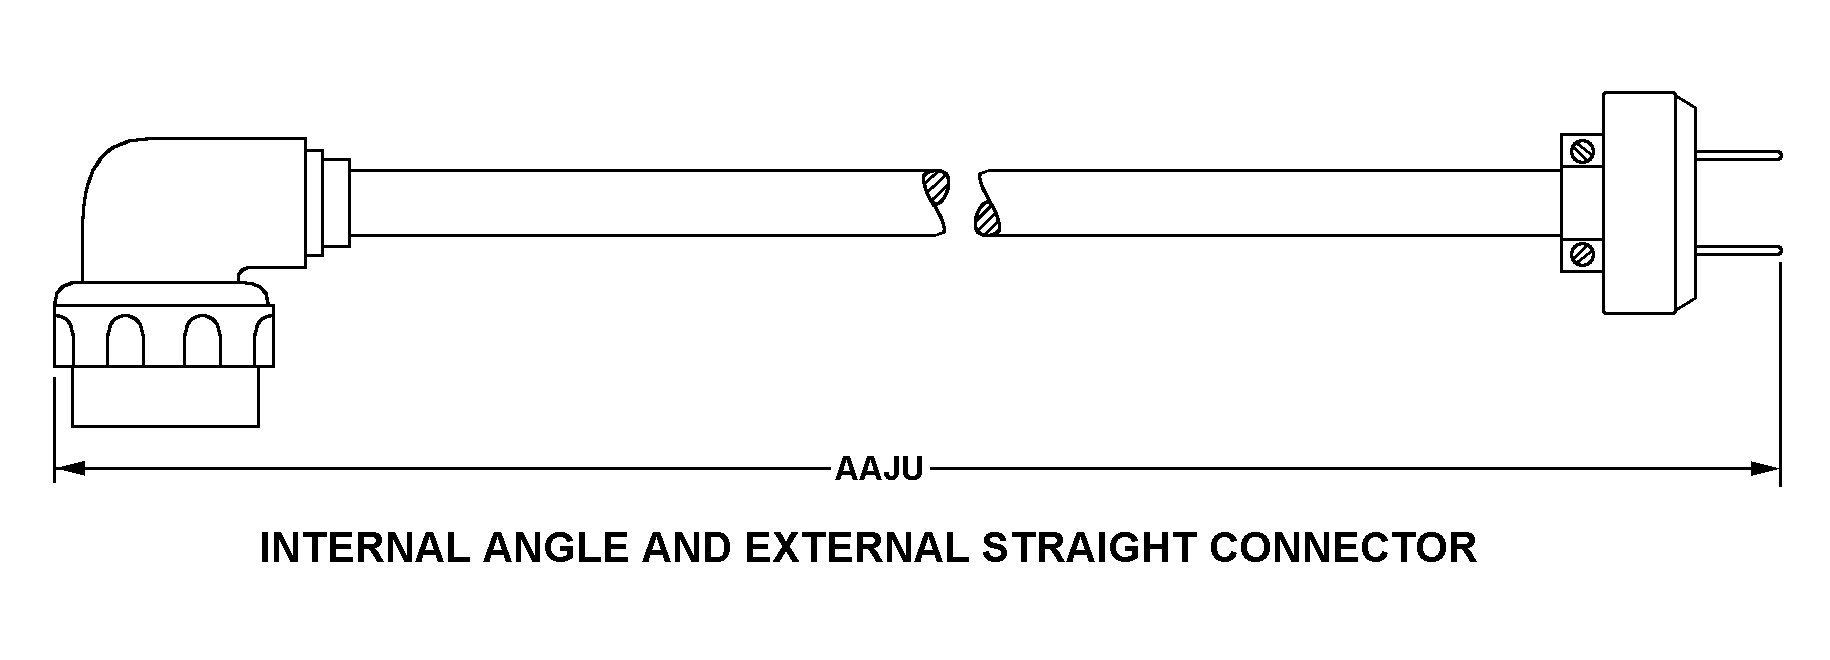 INTERNAL ANGLE AND EXTERNAL STRAIGHT CONNECTOR style nsn 5995-01-138-8534